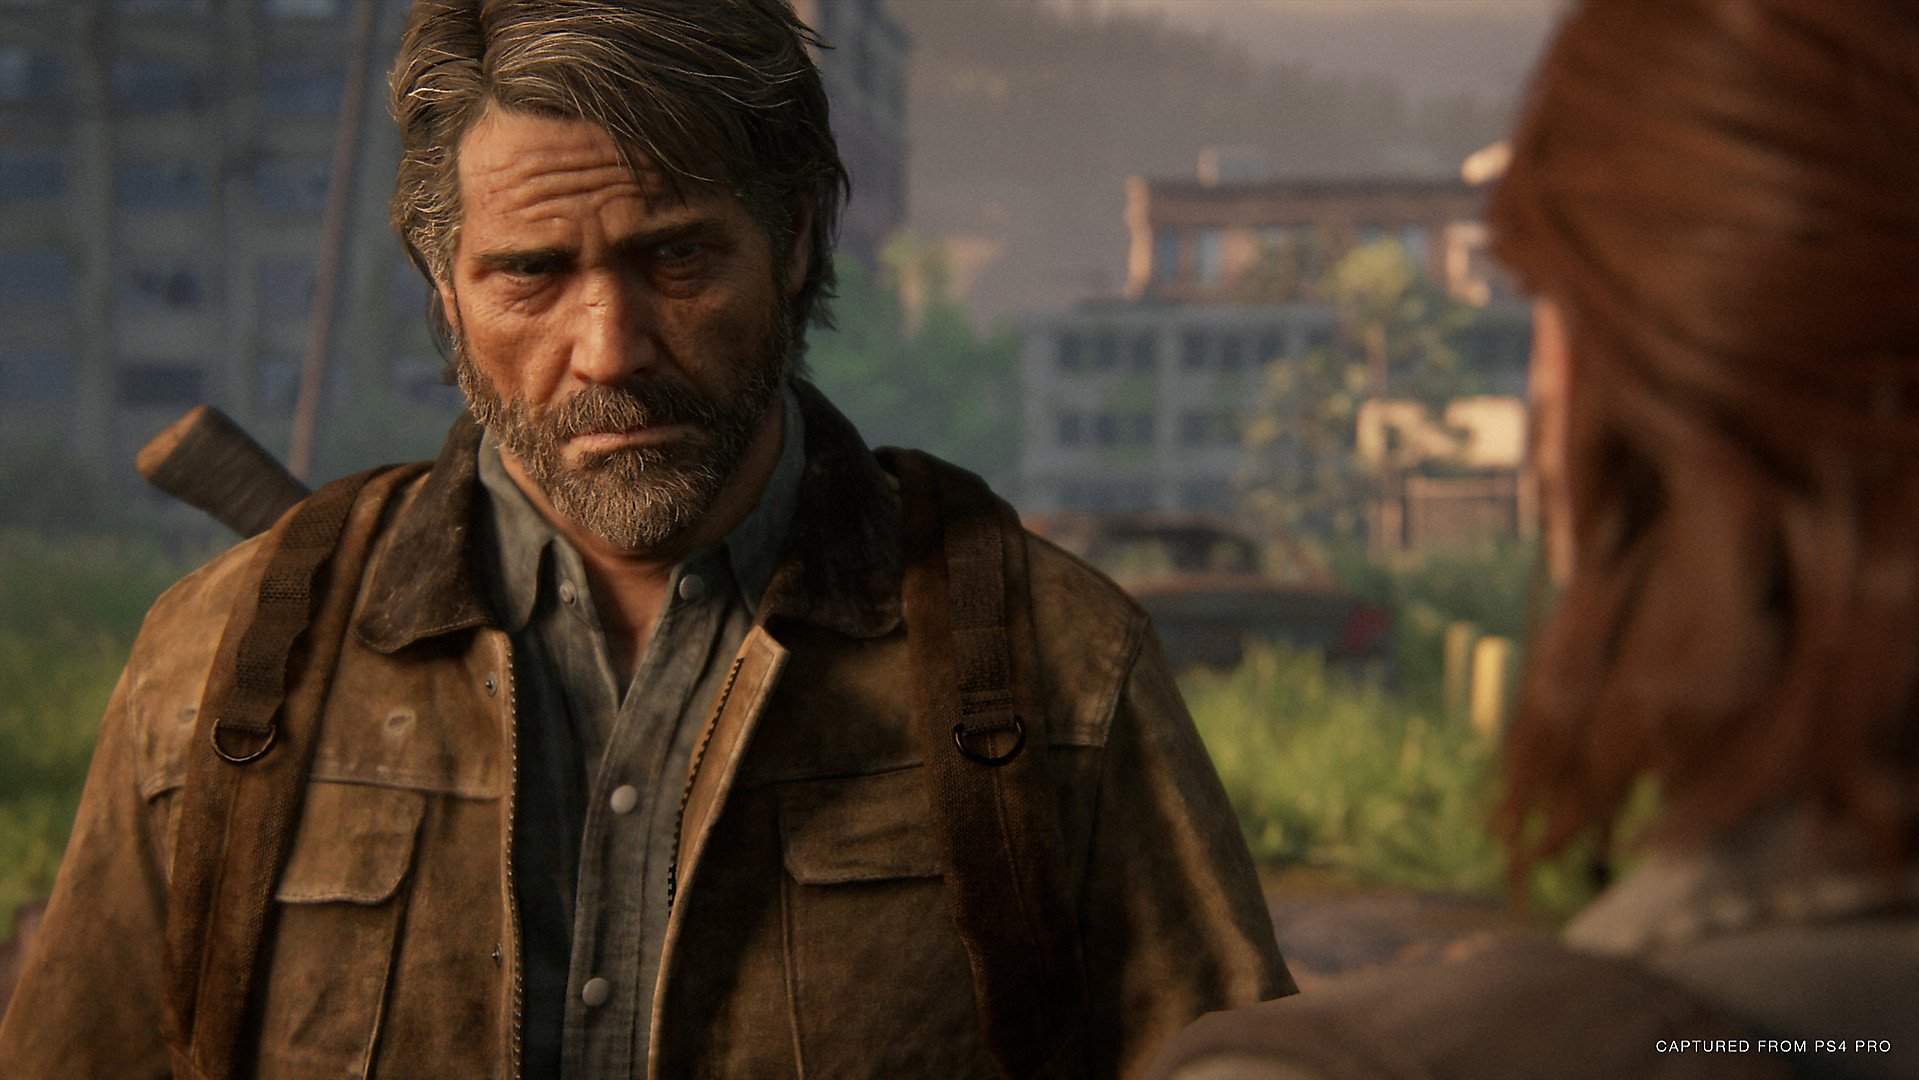 Last of Us 2 director says 'no final decision yet' on potential